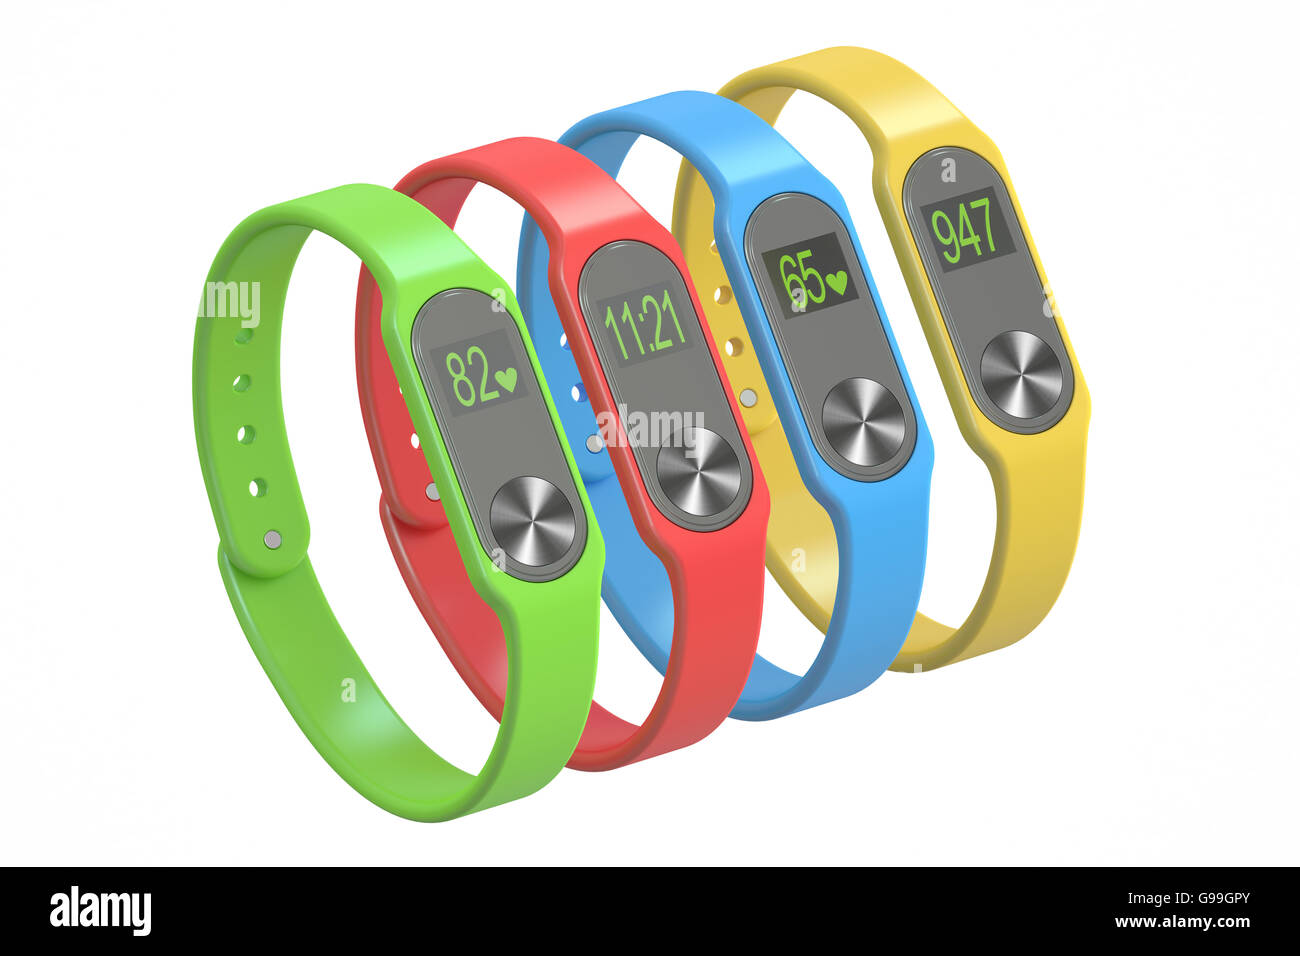 set of activity trackers or fitness bracelets, 3D rendering isolated on white background Stock Photo